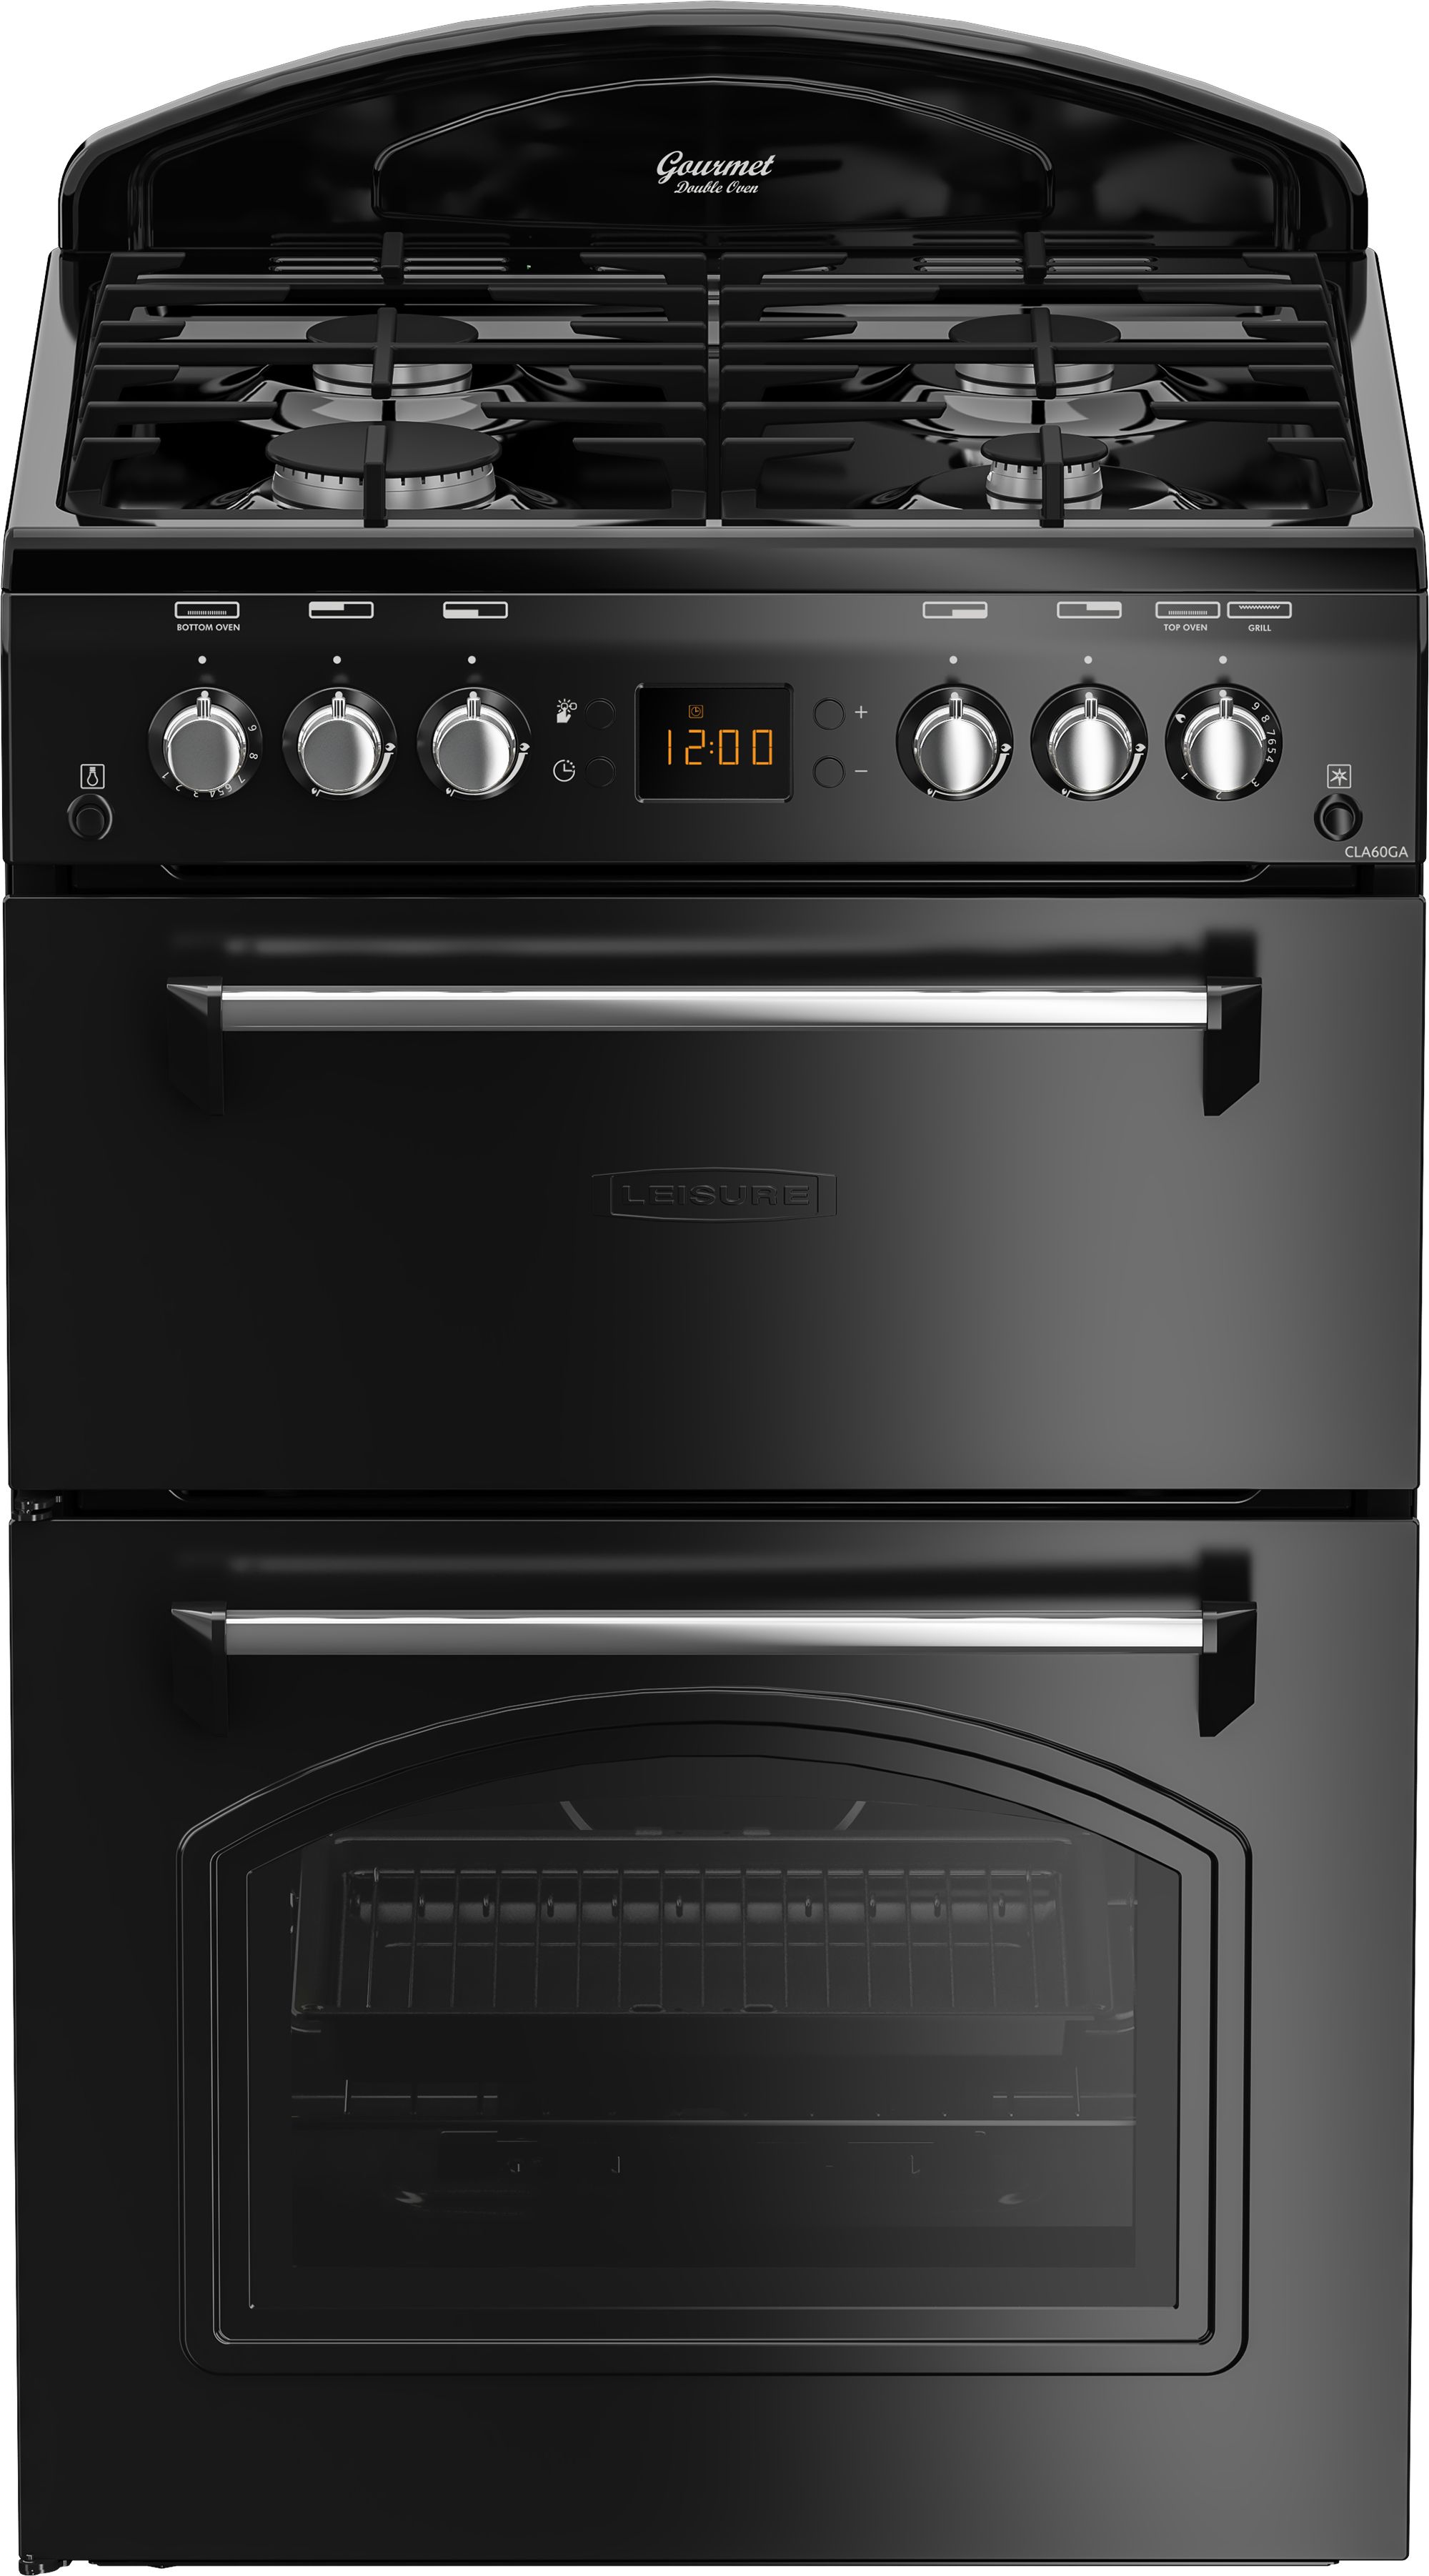 Leisure CLA60GAK Freestanding Gas Cooker with Variable grill - Black - A+ Rated, Black